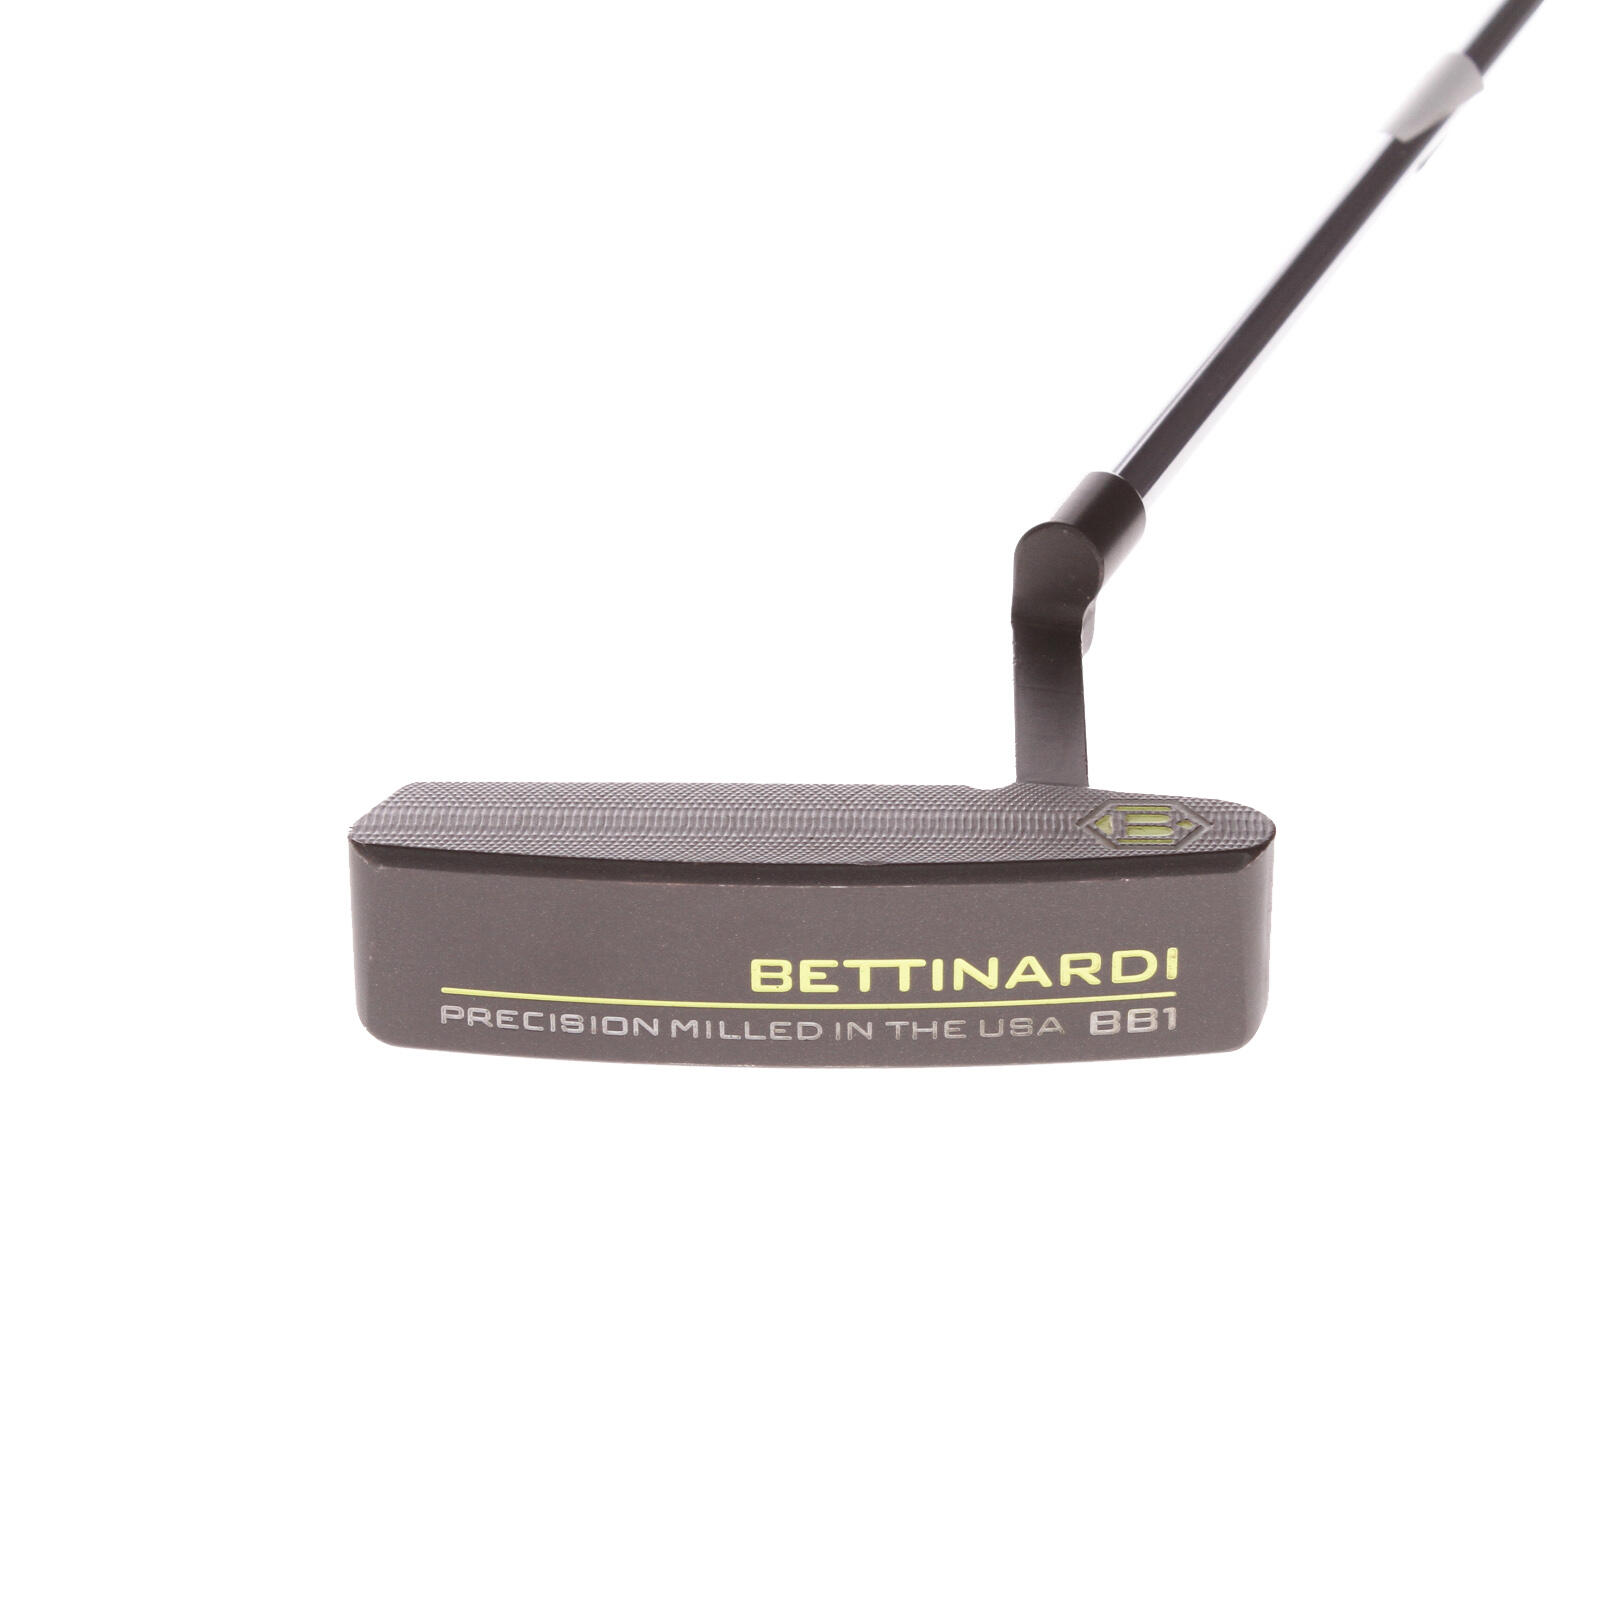 USED - Bettinardi BB1 Putter 33 Inches Length Steel Shaft Right Handed - GRADE B 2/7